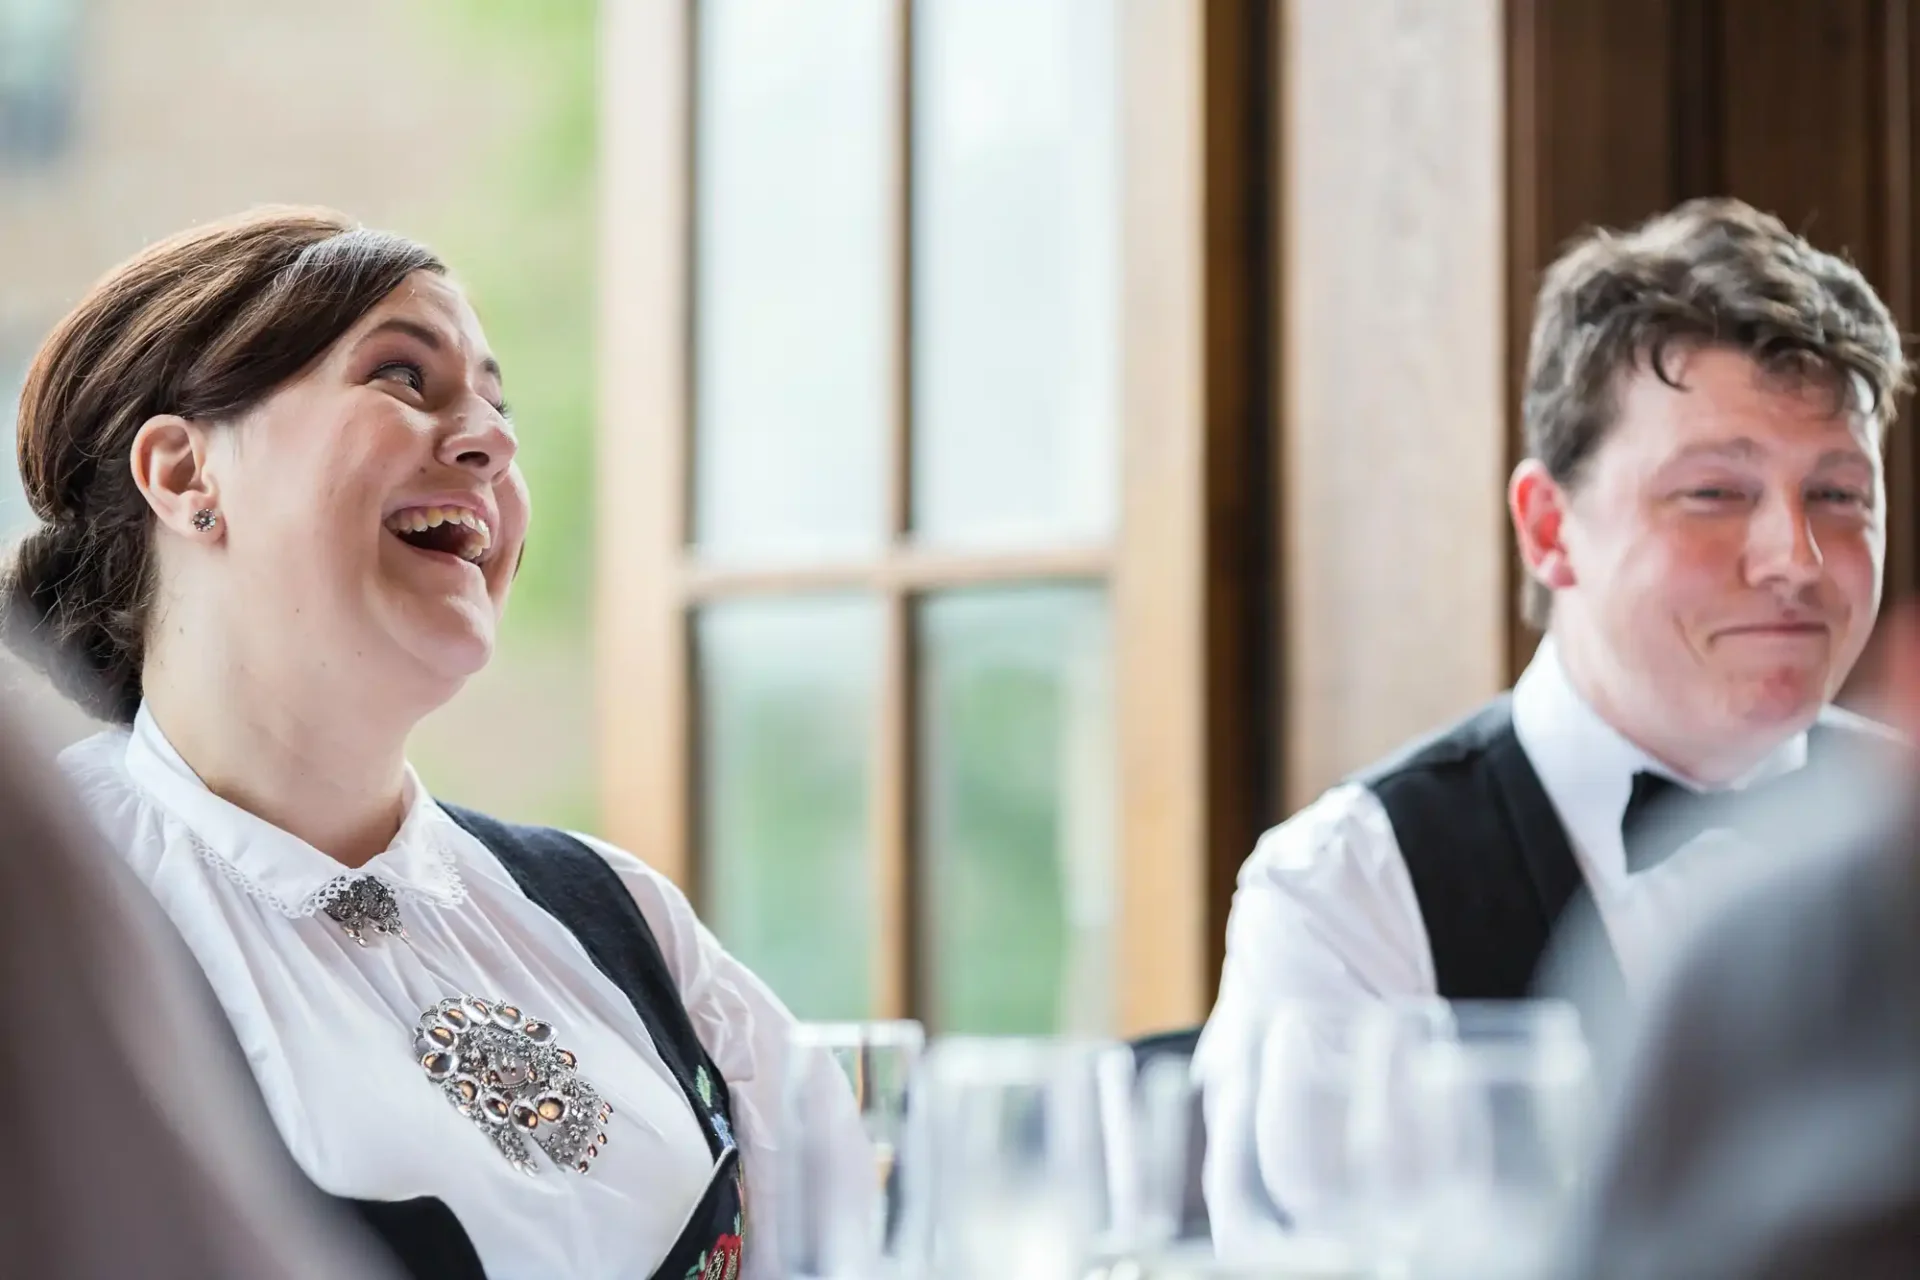 Woman in embroidered blouse laughing joyfully at a dining table beside a man in a tuxedo who is smiling.